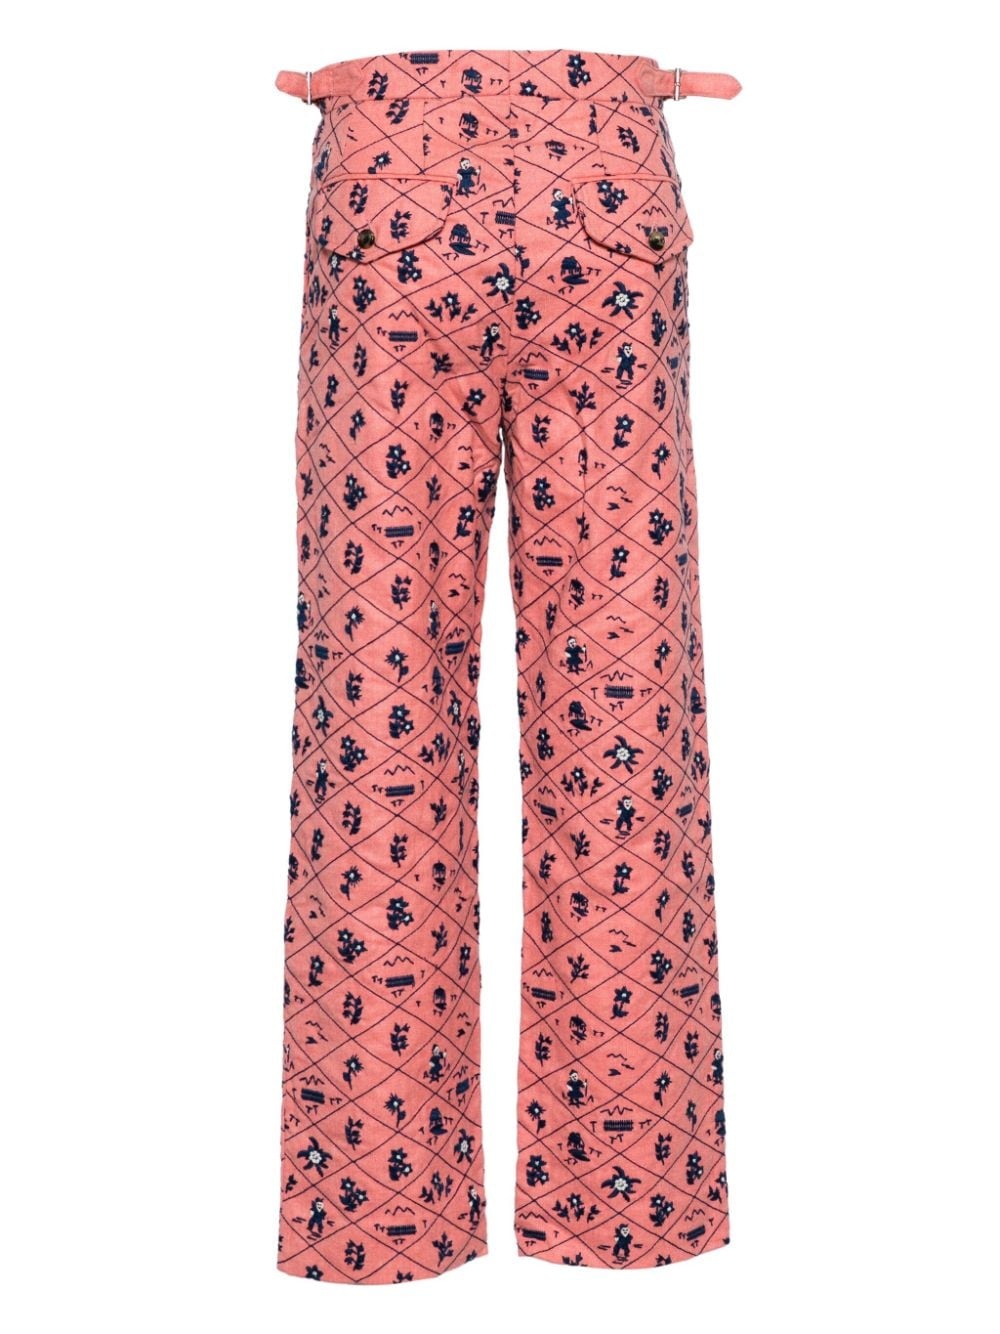 Monte Rosa wool trousers - 2